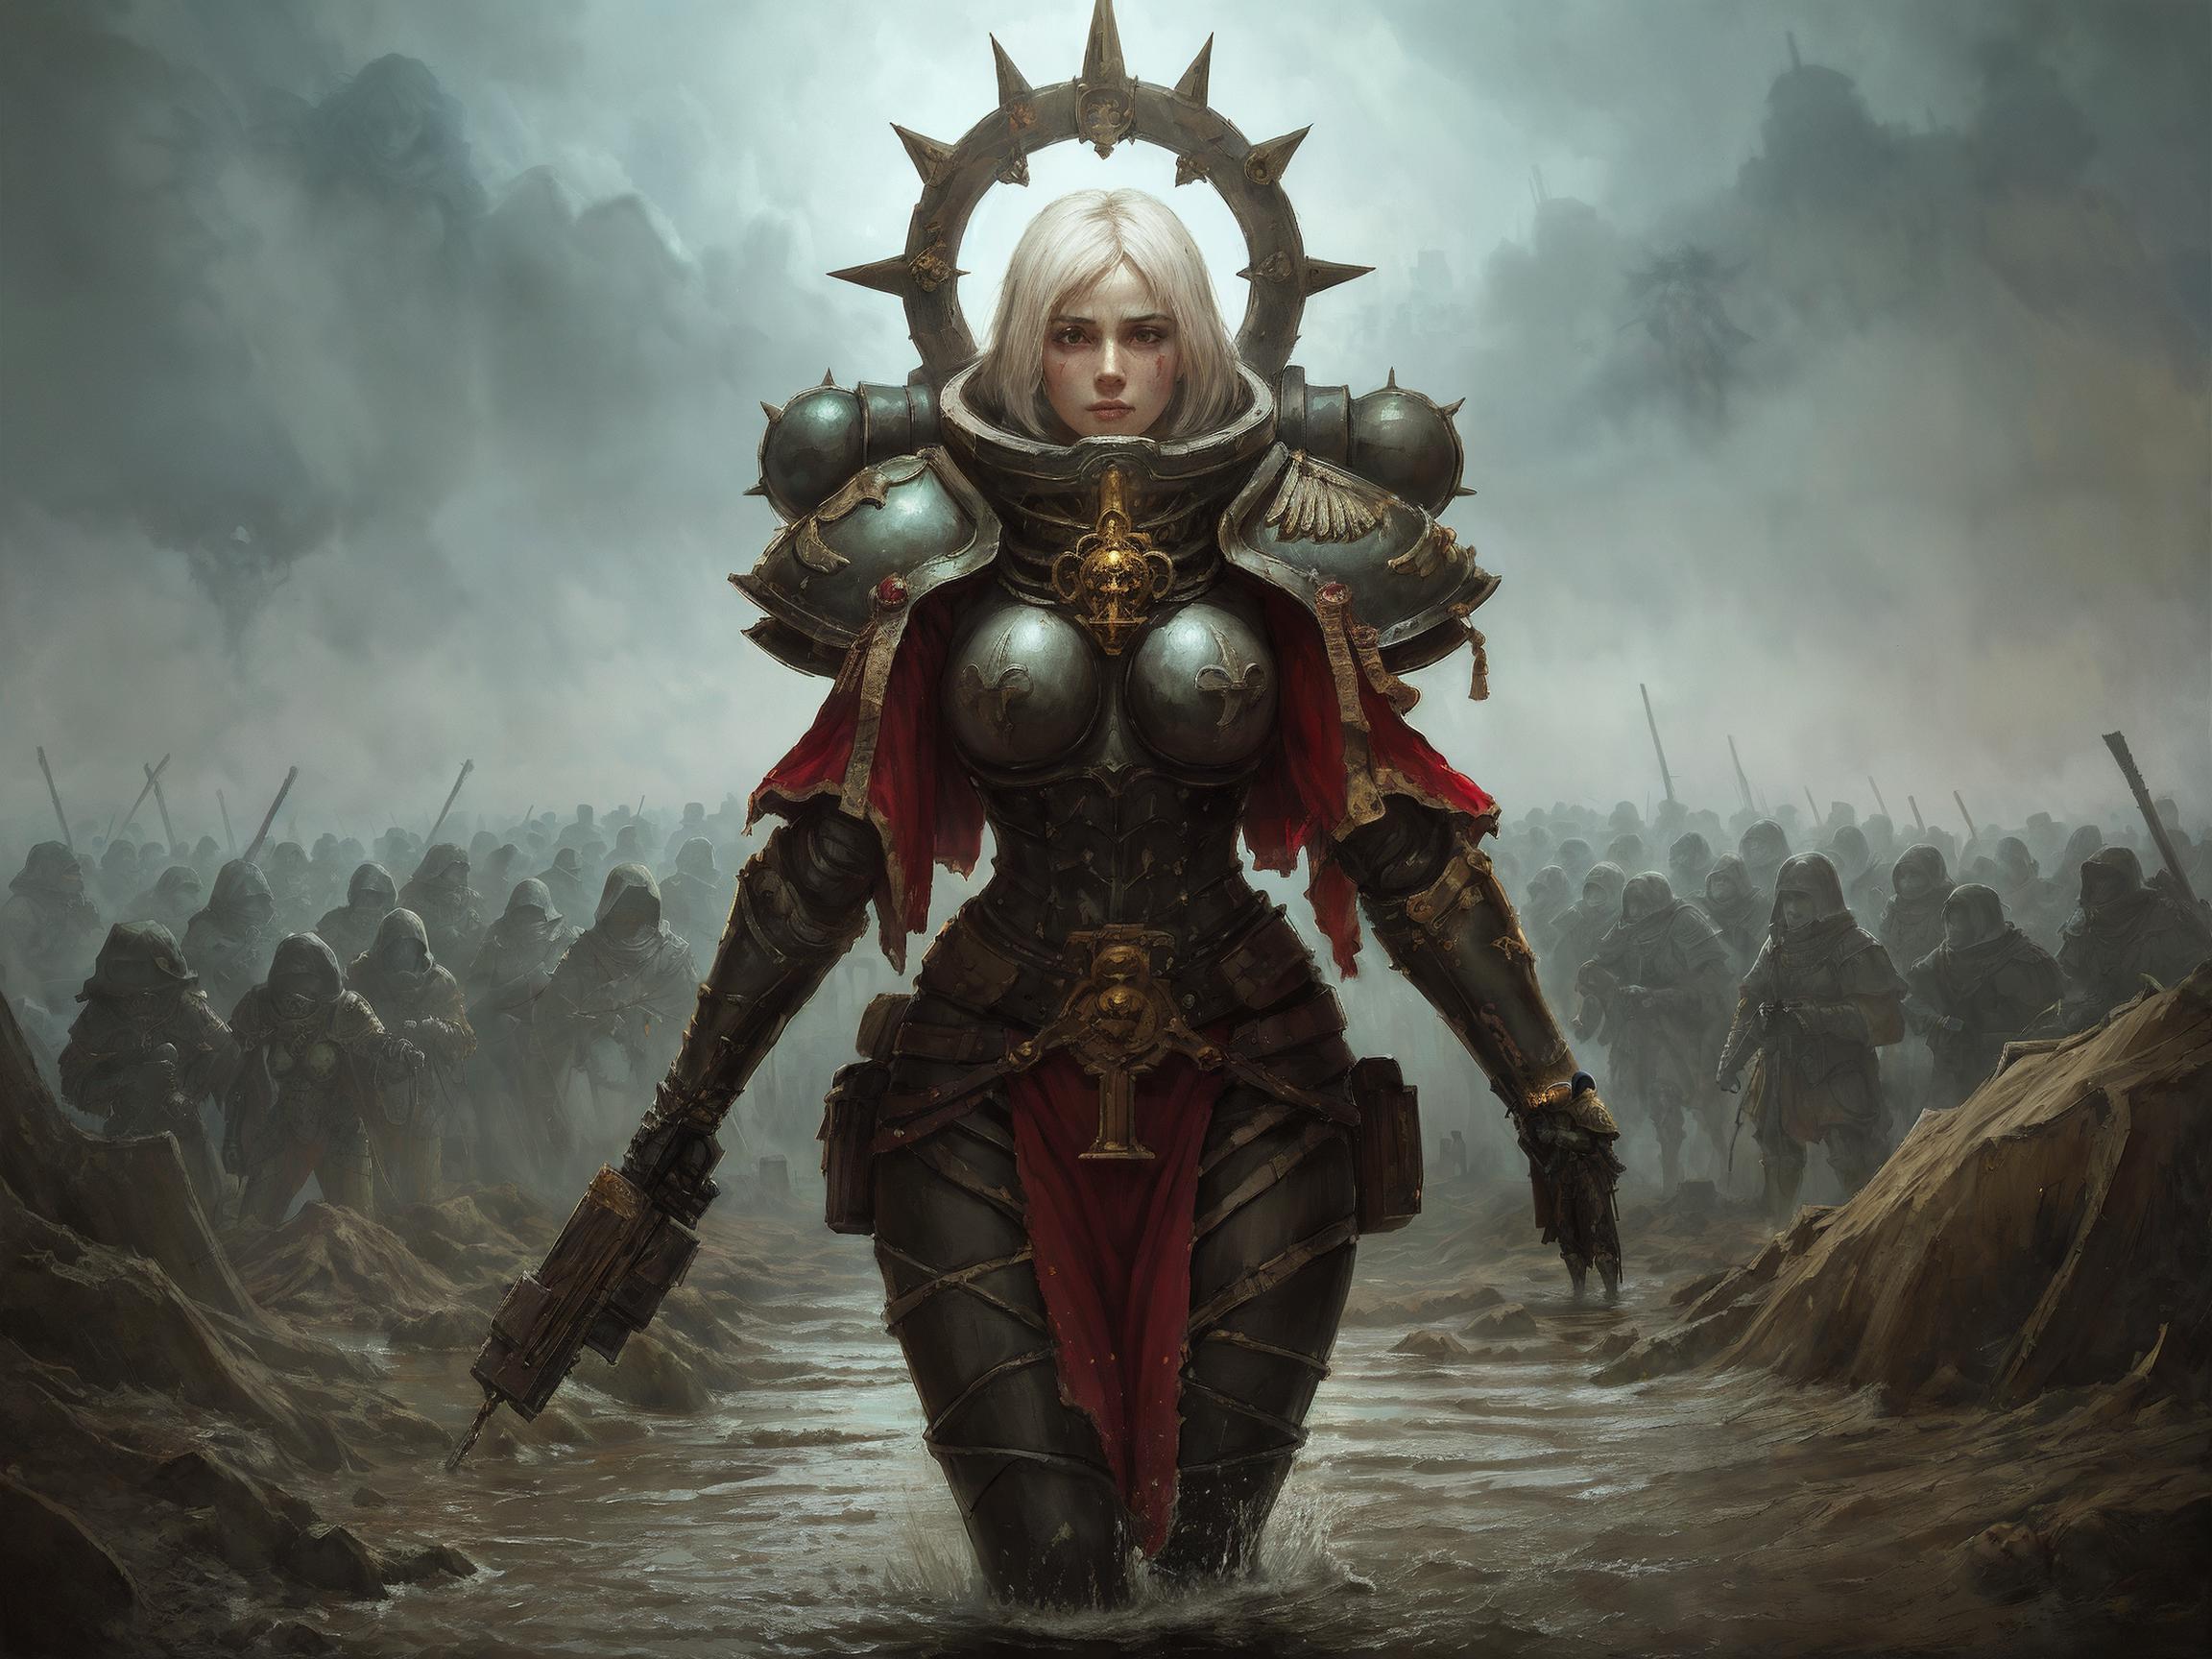 A Warrior-like Lady with Blonde Hair in a Medieval Fantasy Scene